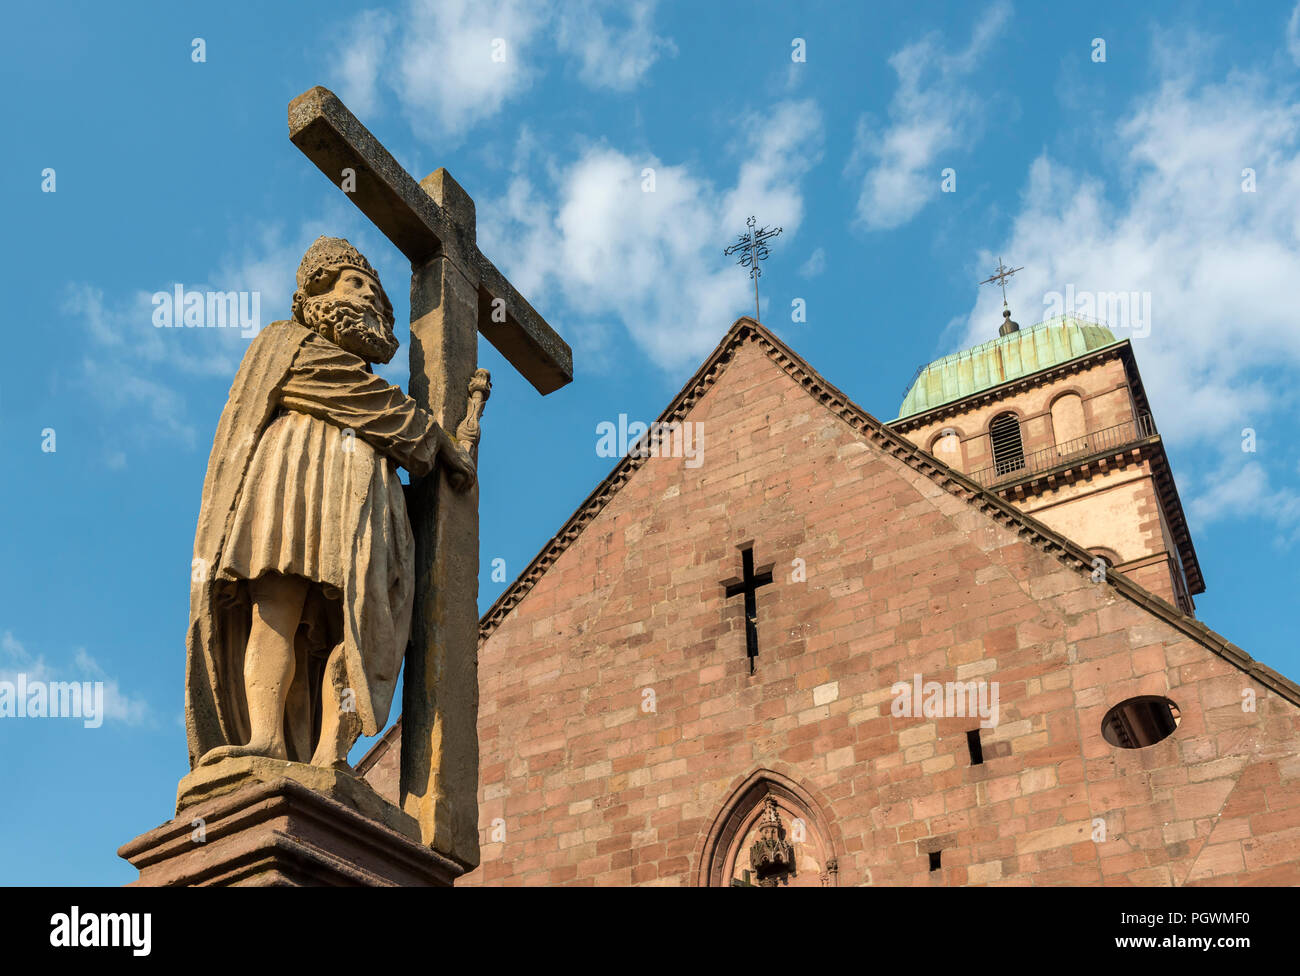 Statue on top of Emperor Constantin Fountain in front of Sainte Croix church in Kaysersberg, France Stock Photo